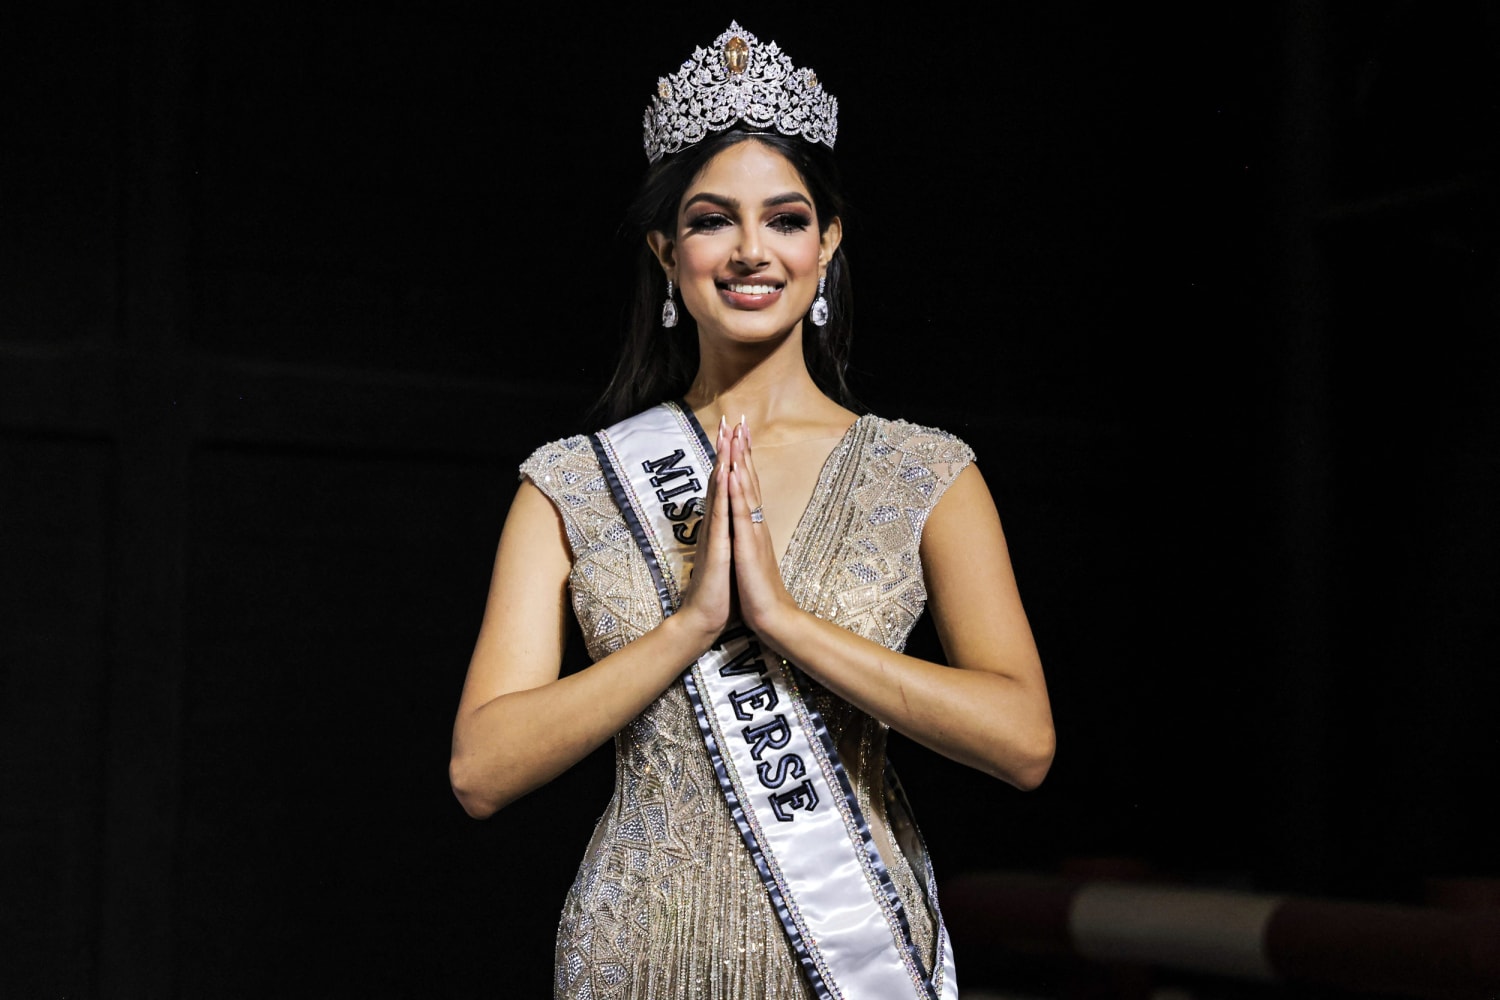 The evolution of the international Indian beauty queen